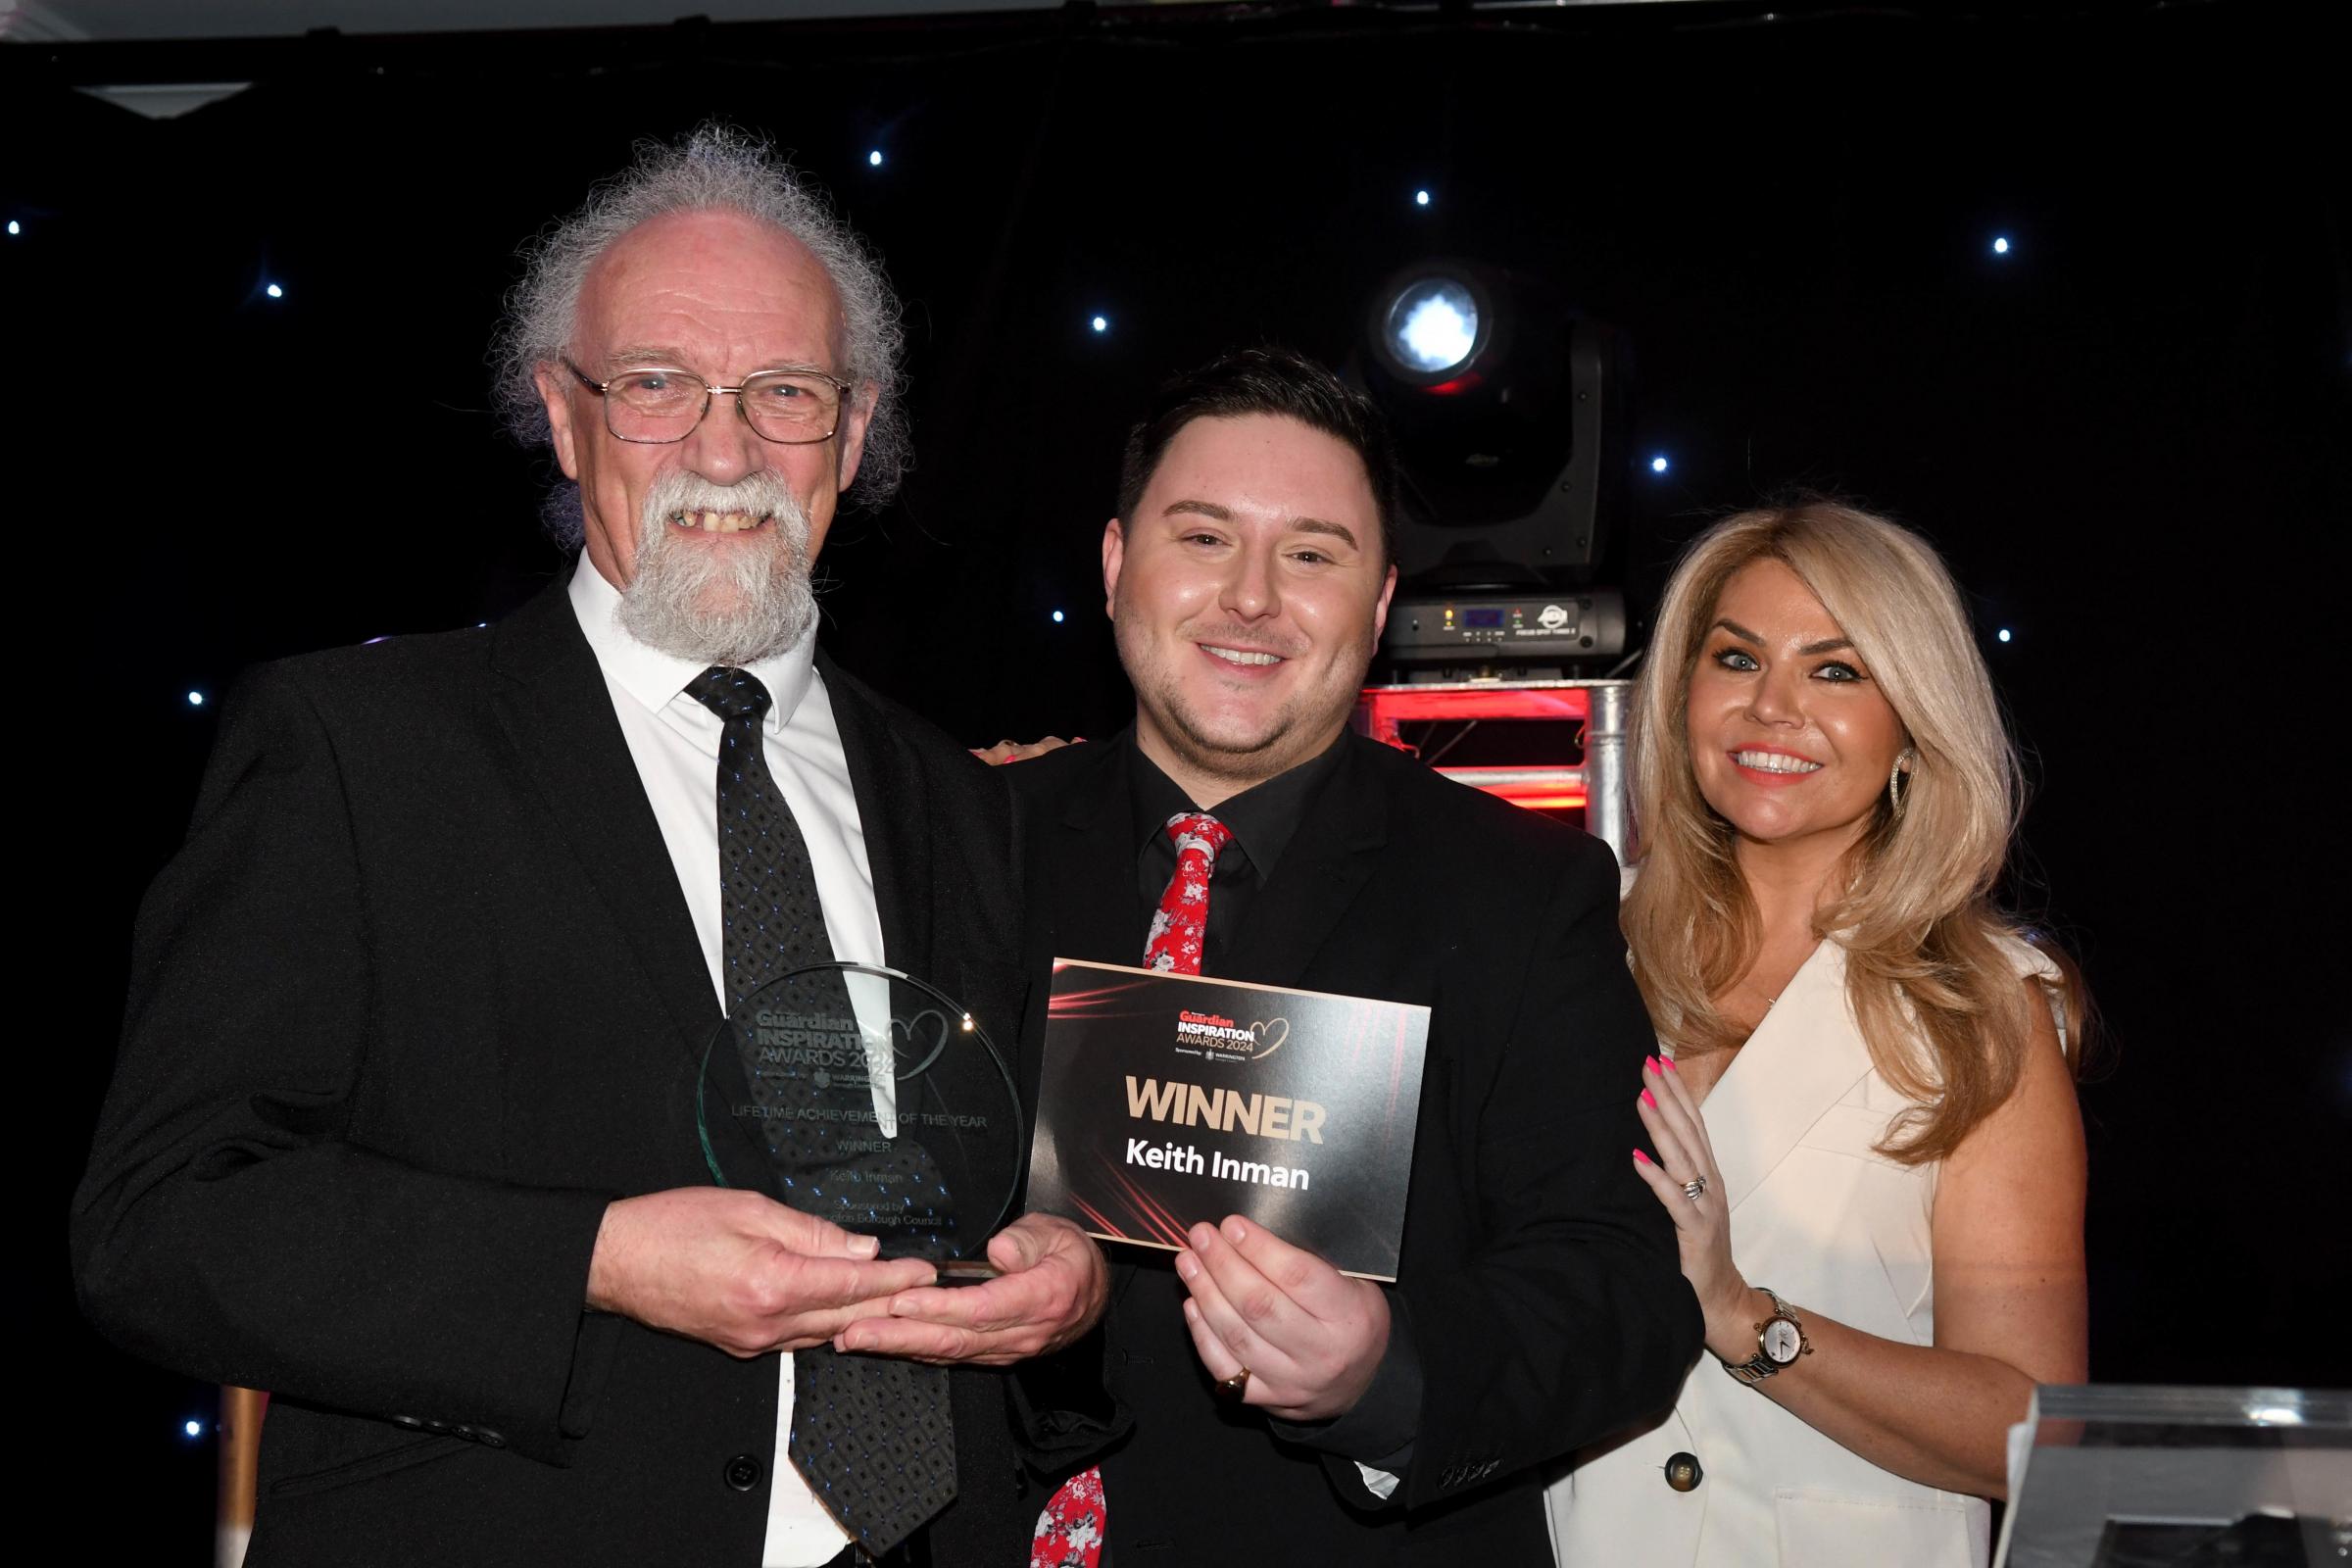 Lifetime Achievement Award winner Keith Inman with Leanne Campbell and Richard Duggan editor of the Warringon Guardian